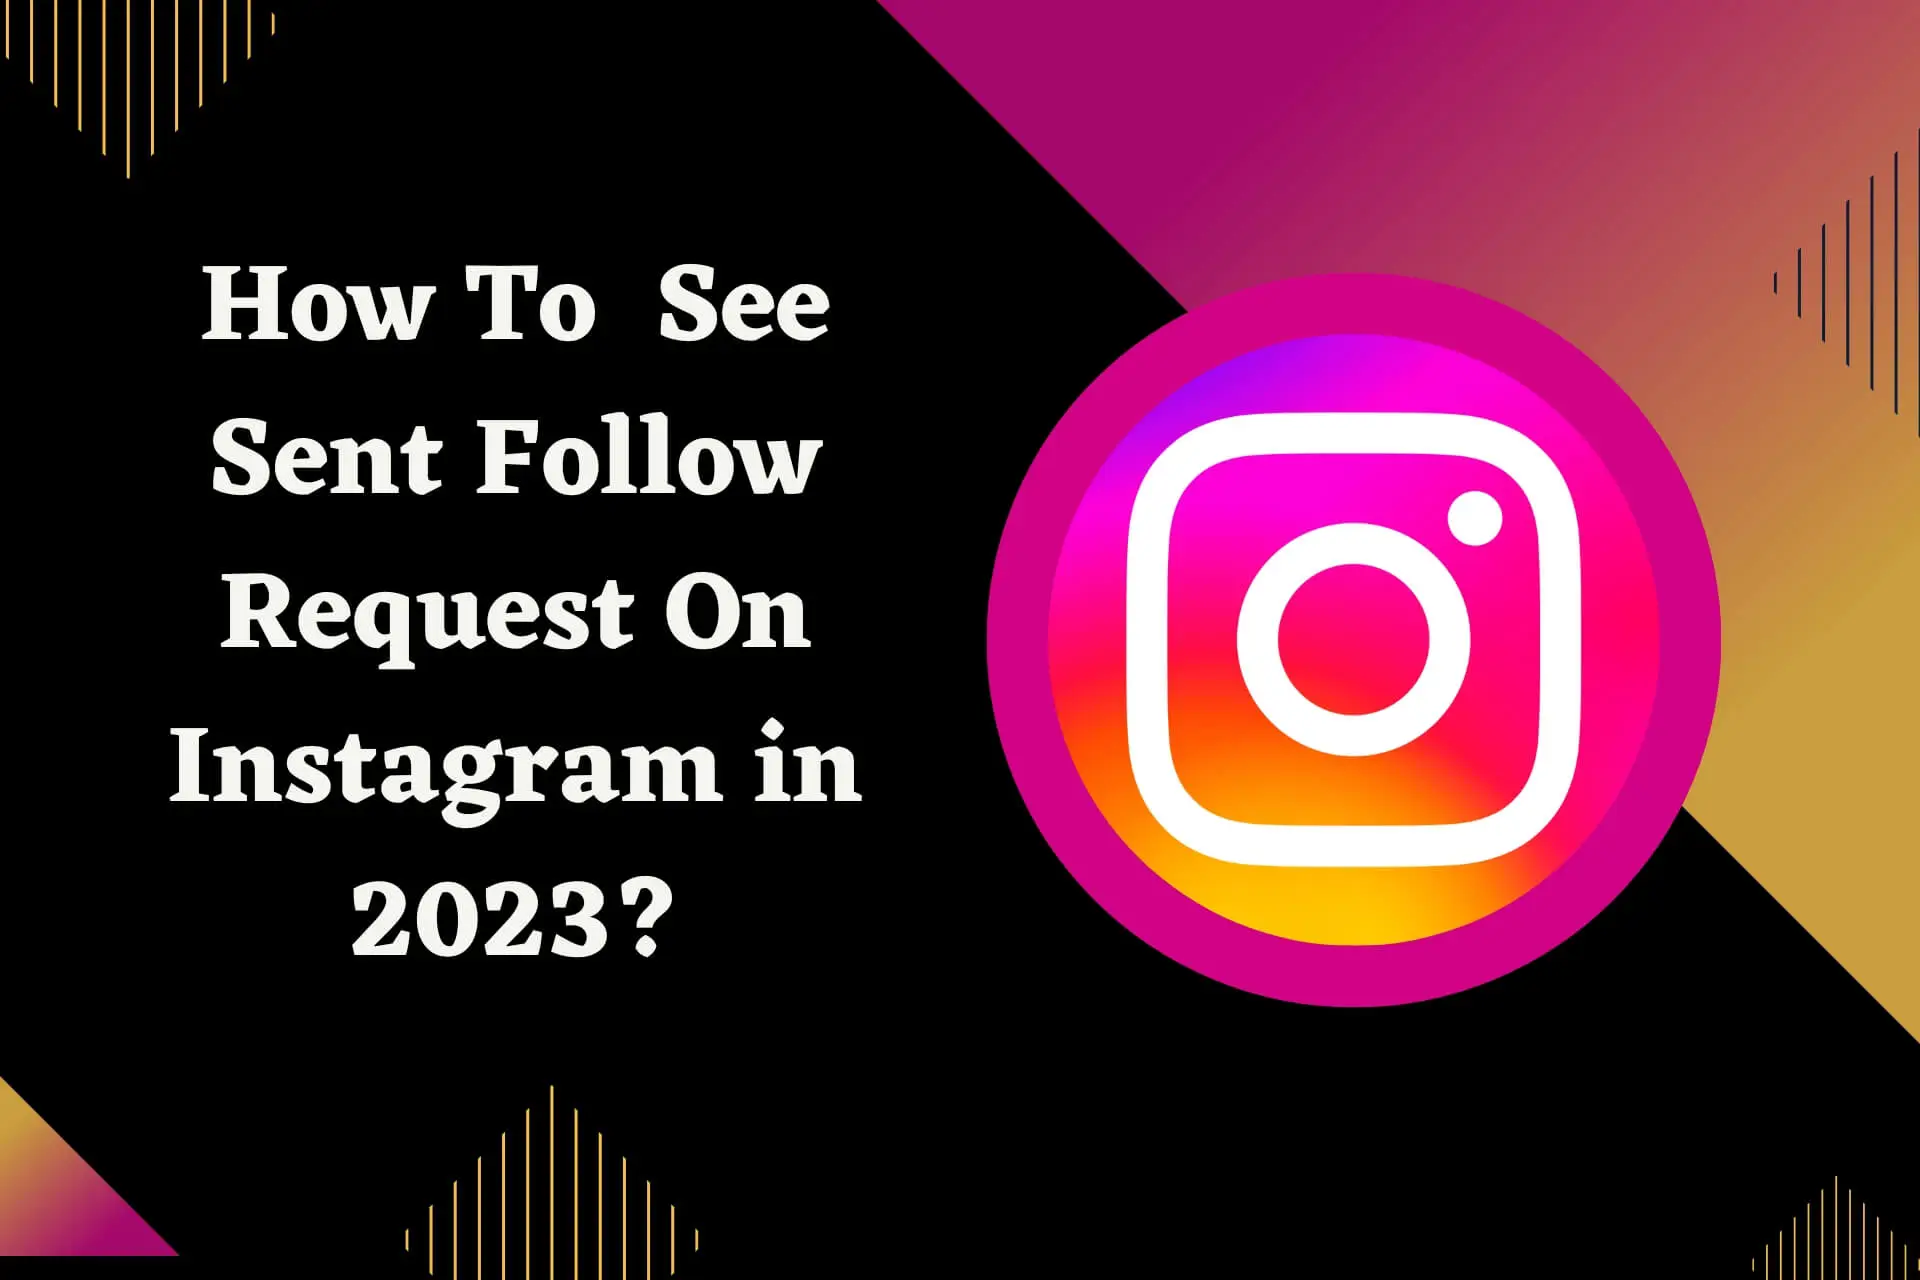 How to see sent follow request on Instagram